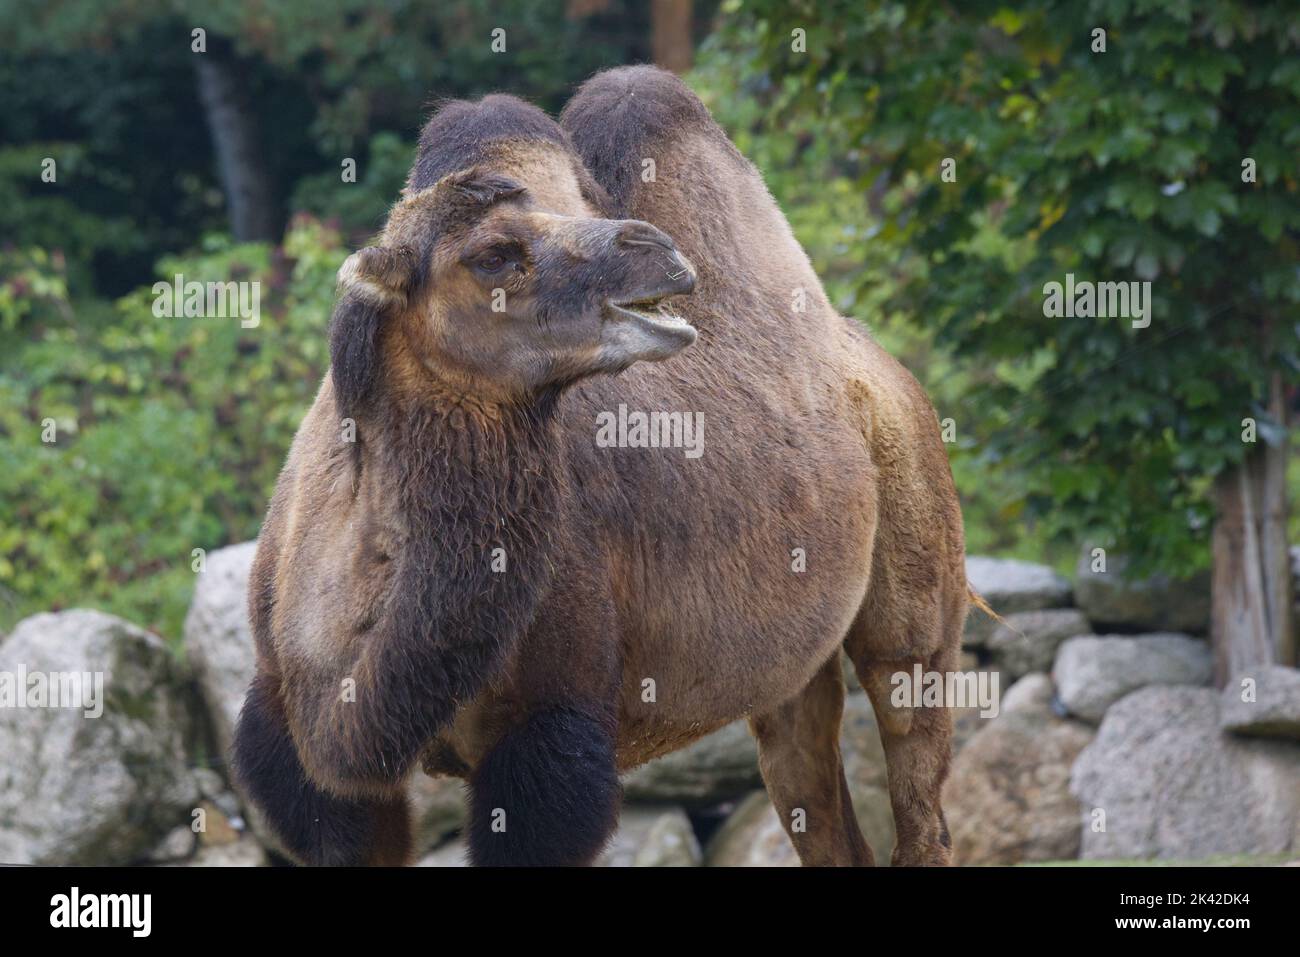 Bactrian camel in the wildness, stone rocks, green trees Stock Photo